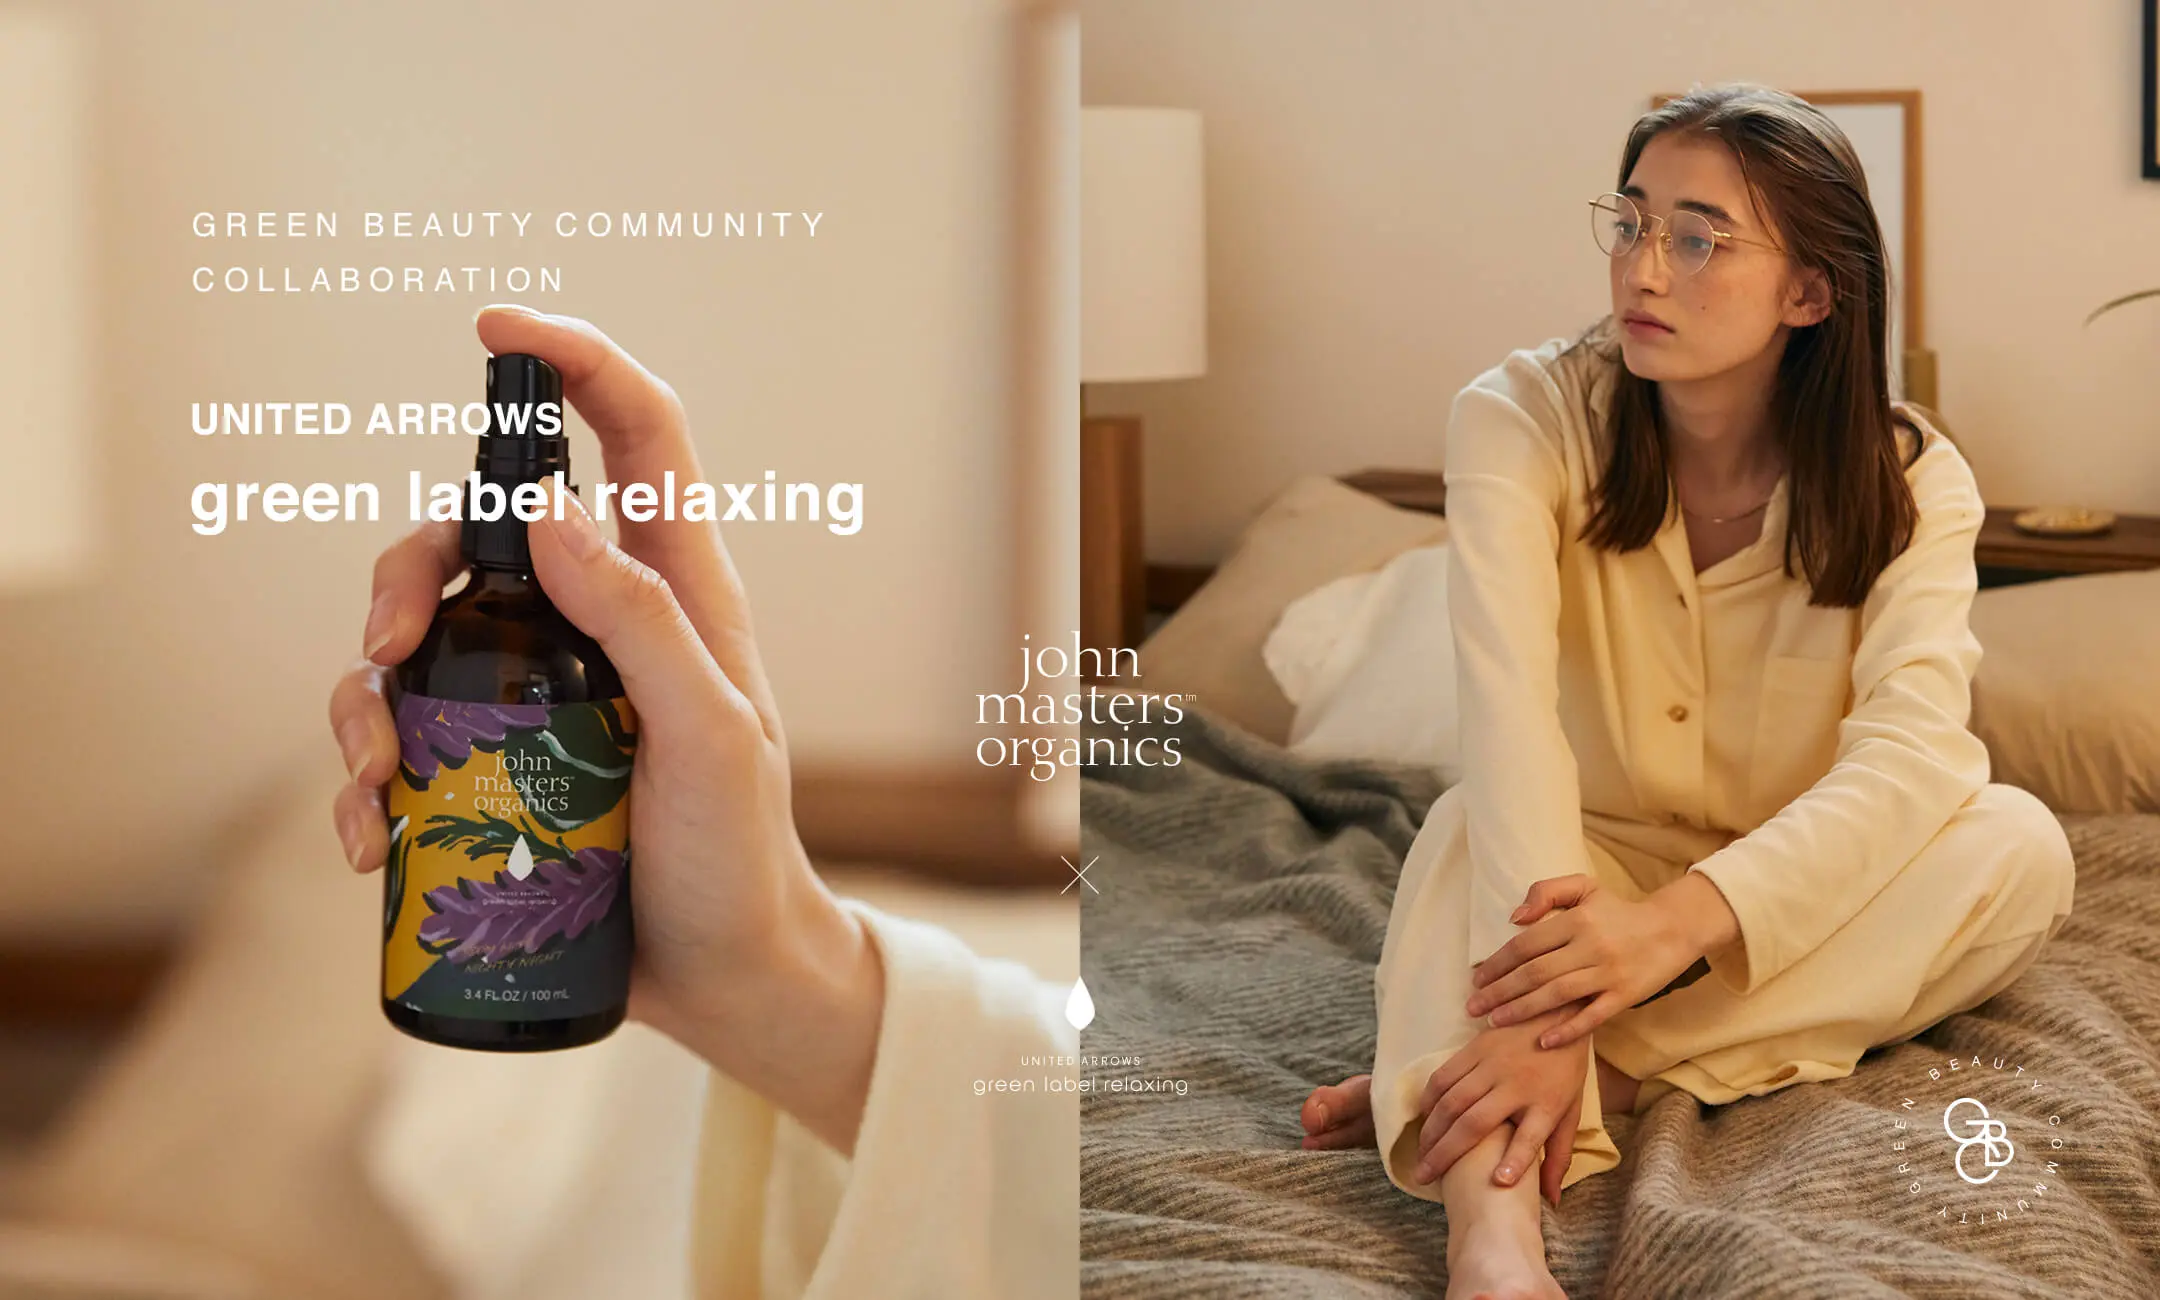 GREEN BEAUTY COMMUNITY COLLABORATION UNITED ARROWS green label relaxing